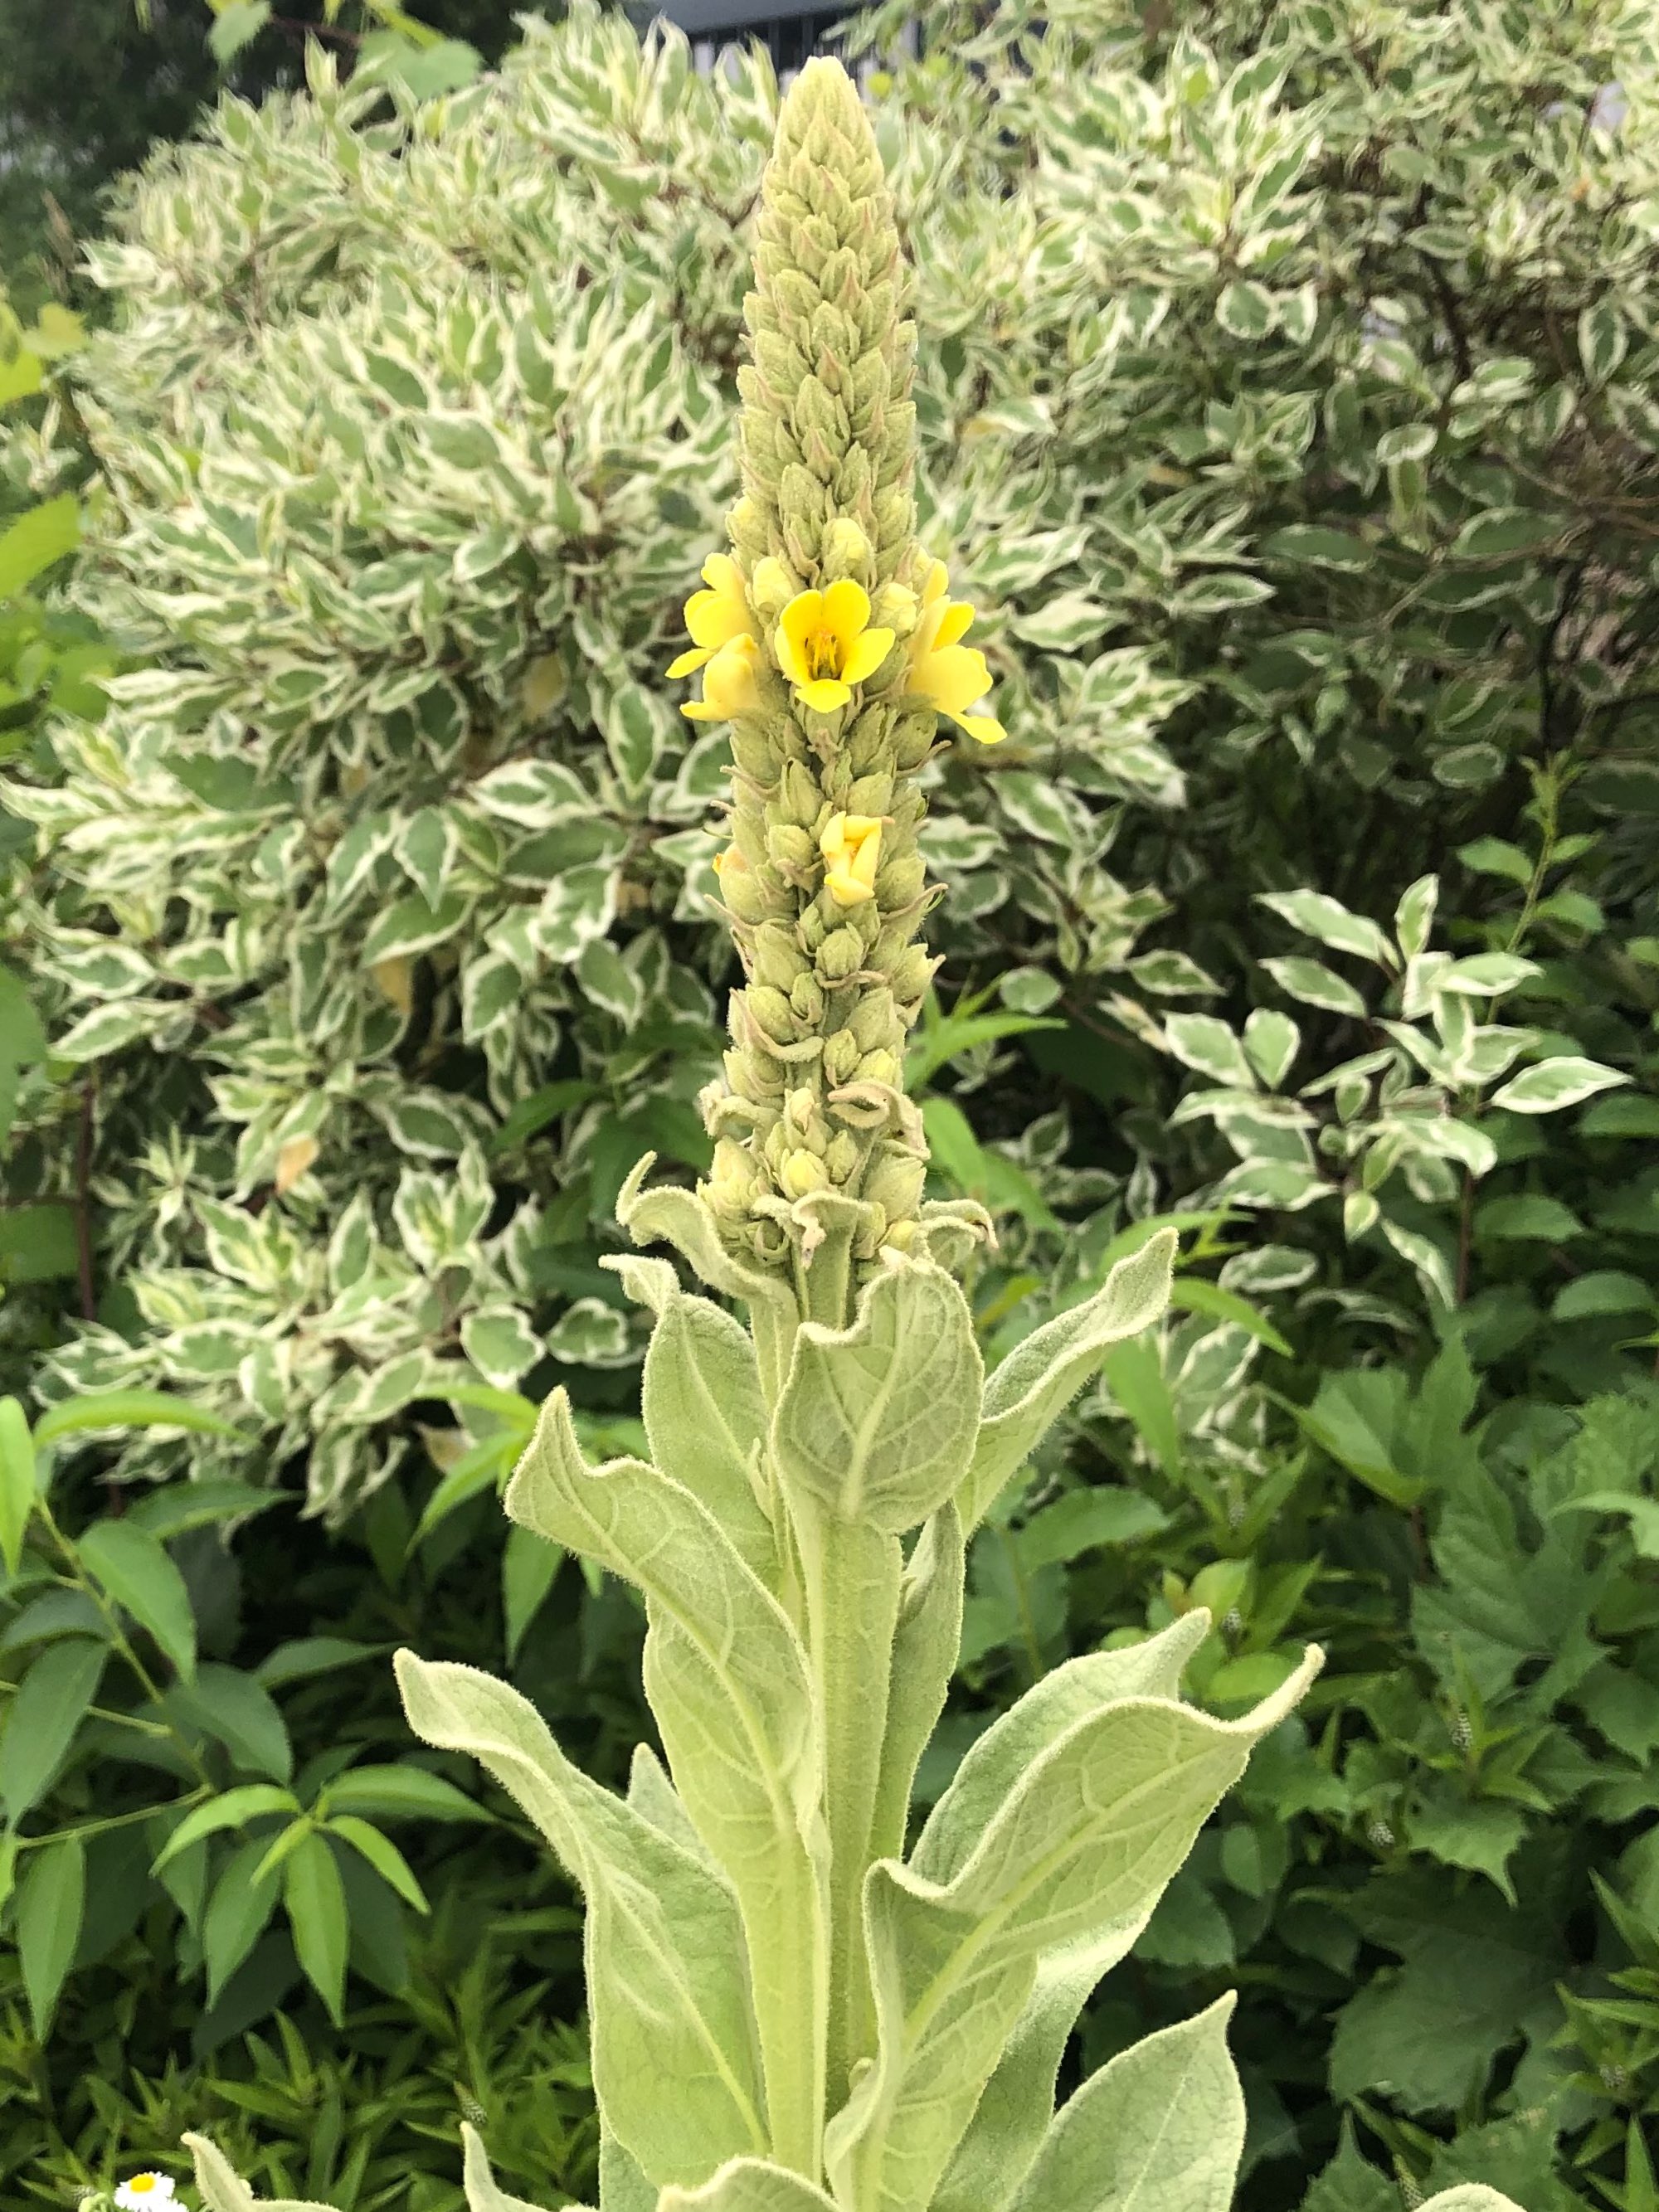 Common Mullein by Badger Road drop-off on June 20, 2021.